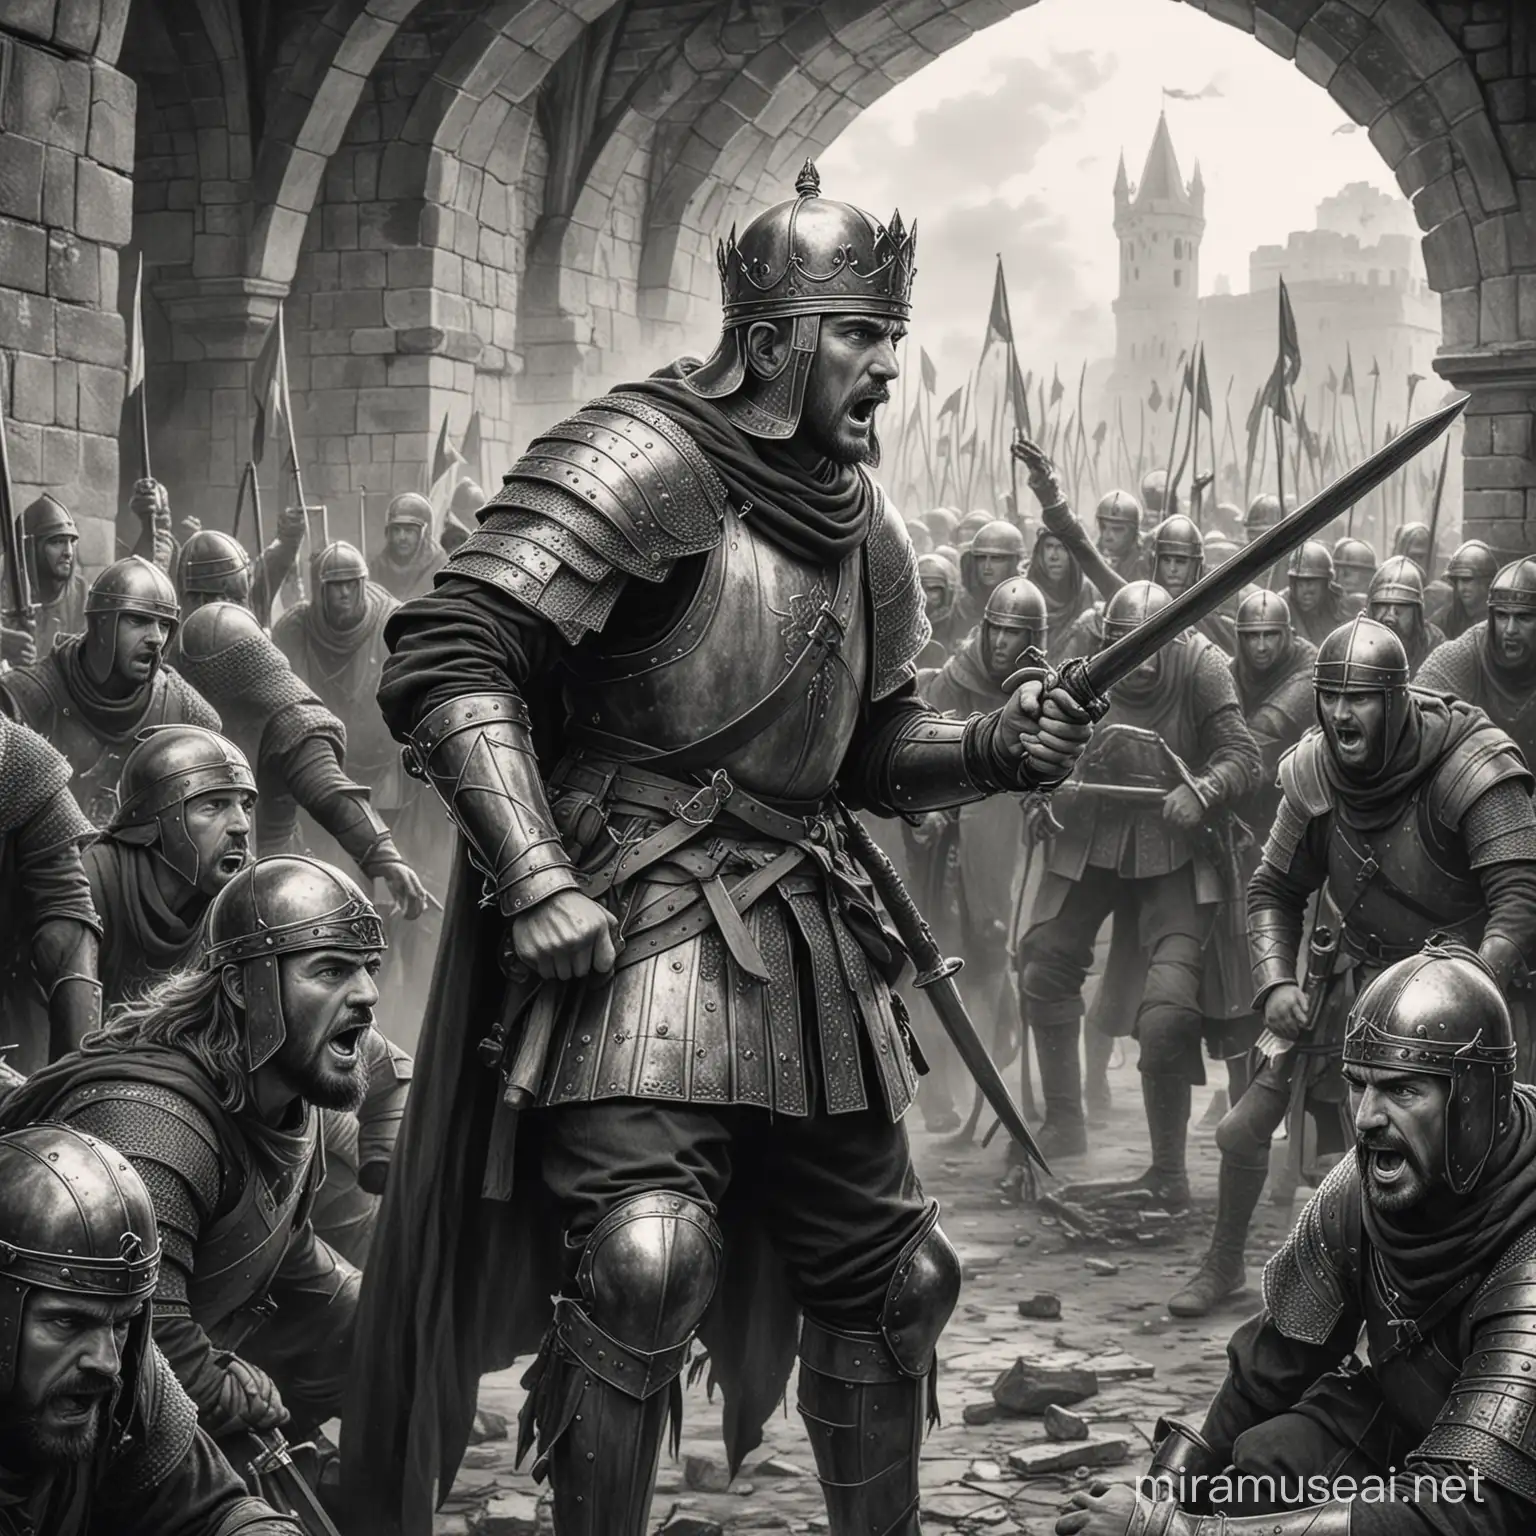 Medieval Soldiers Betraying the King Dramatic Black and White Art